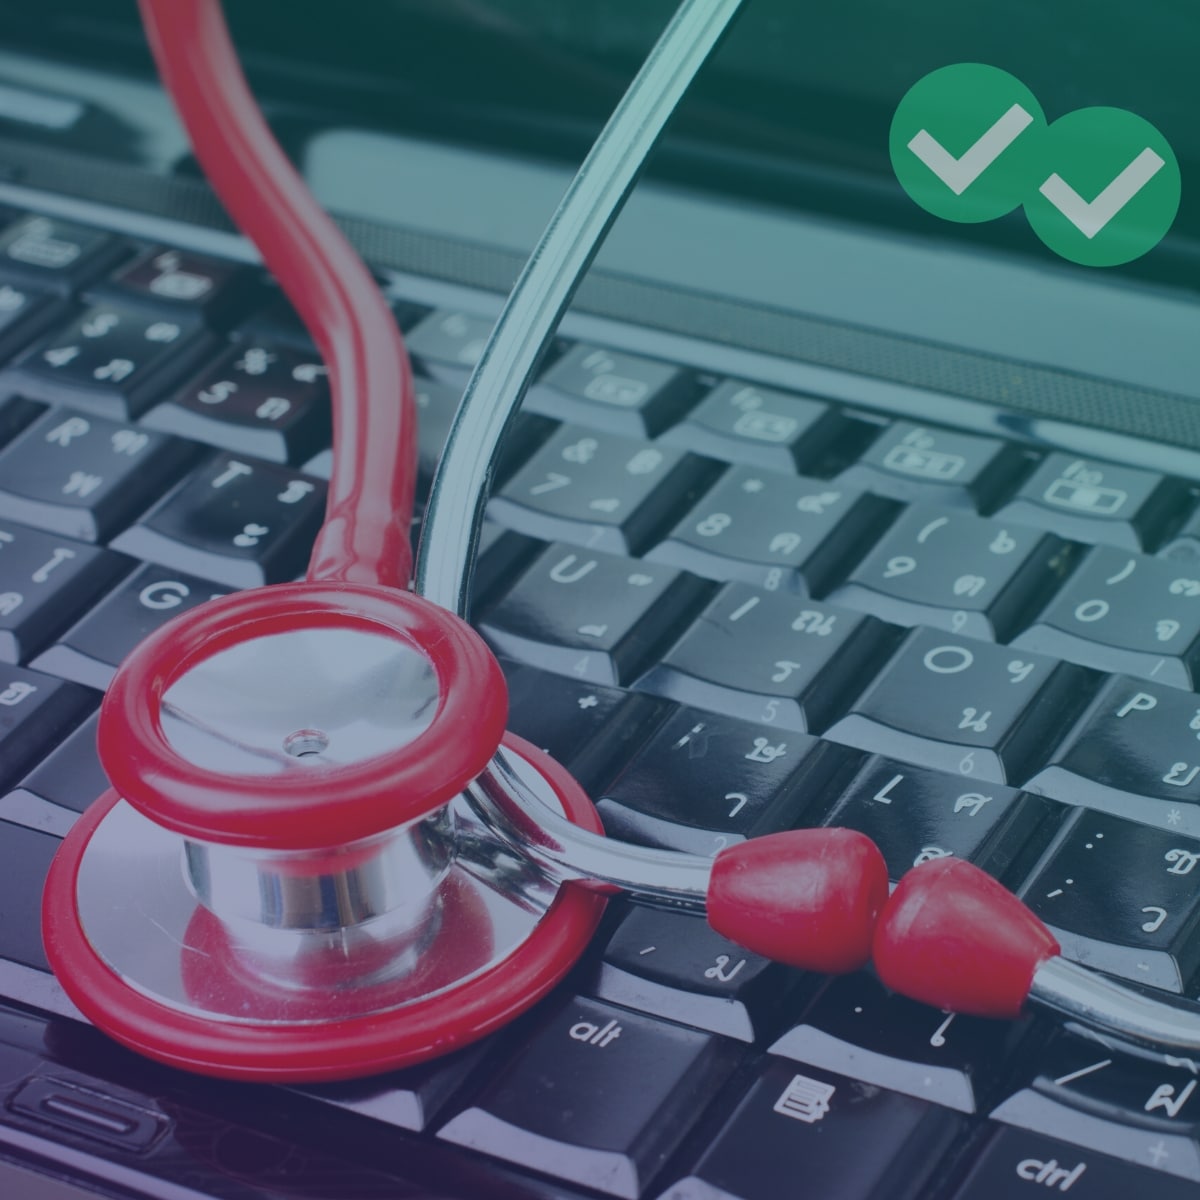 Red stethoscope on black keyboard representing shortened mcat experience - image by magoosh